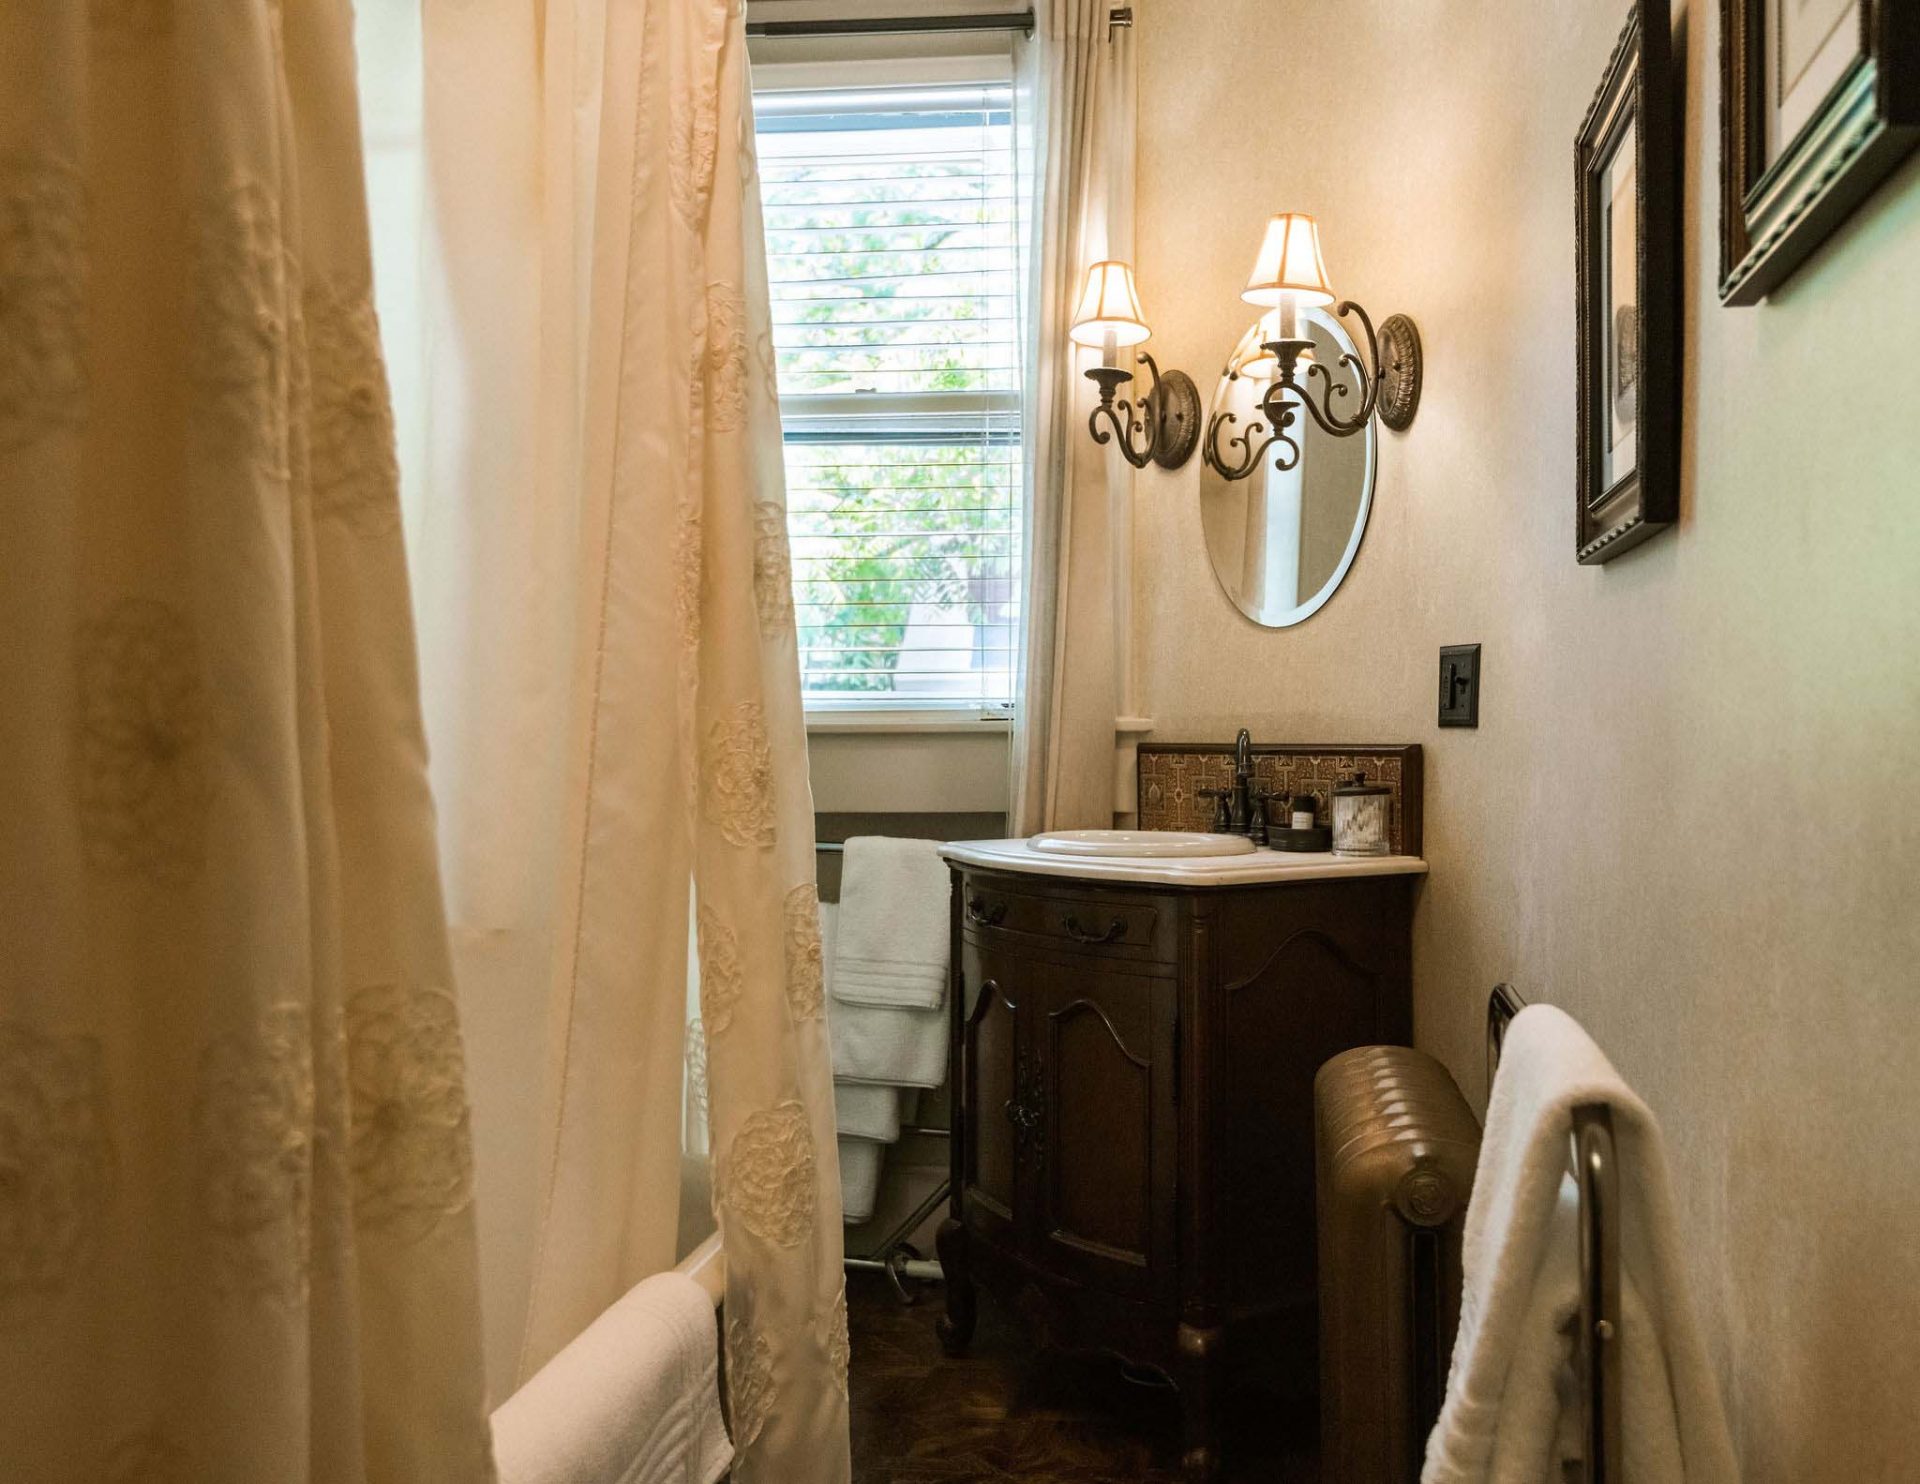 An oval shaped, vintage bathroom with a claw foot tub with shower above and a creamy curtain, sink in a dark wood dresser, and a mirror.